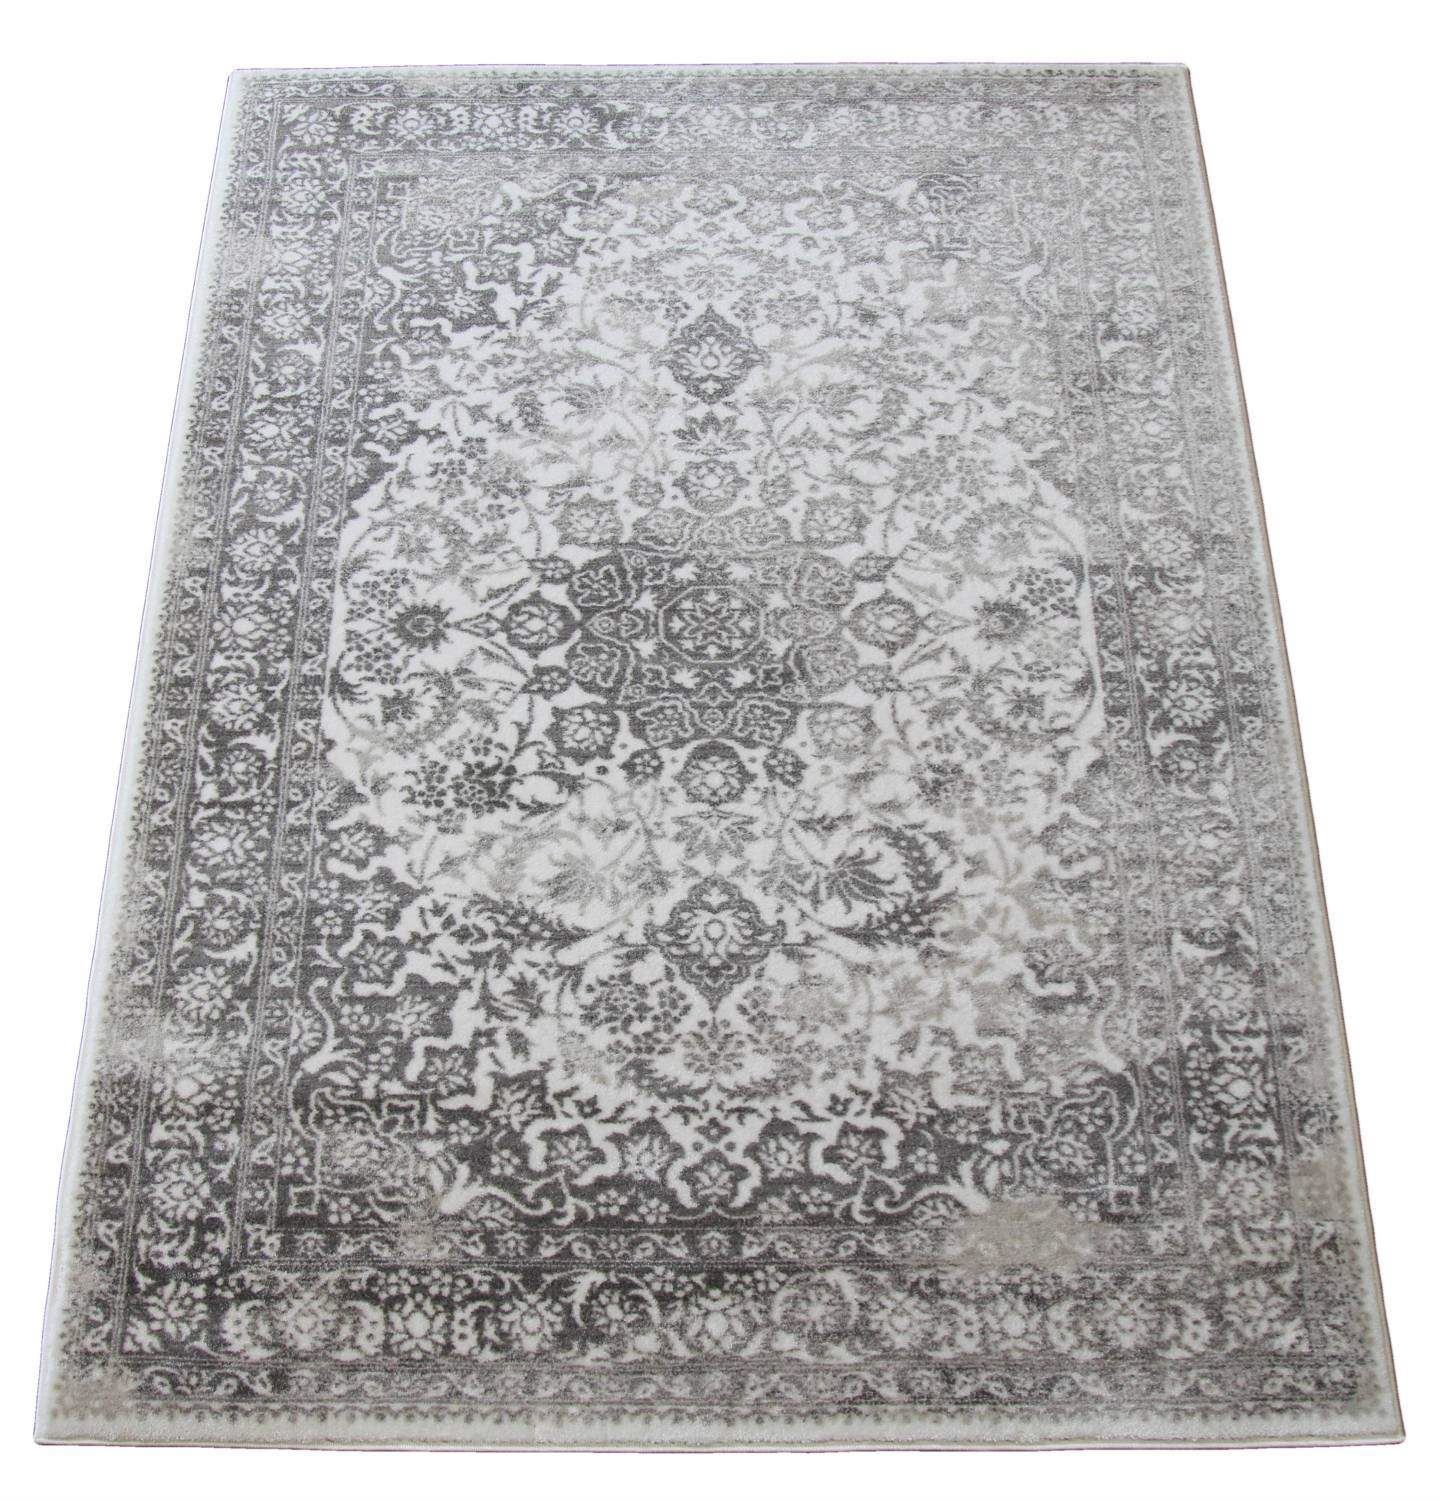 Distressed Medallion Rug Light Gray ChicagoCozy Rugs Chicago